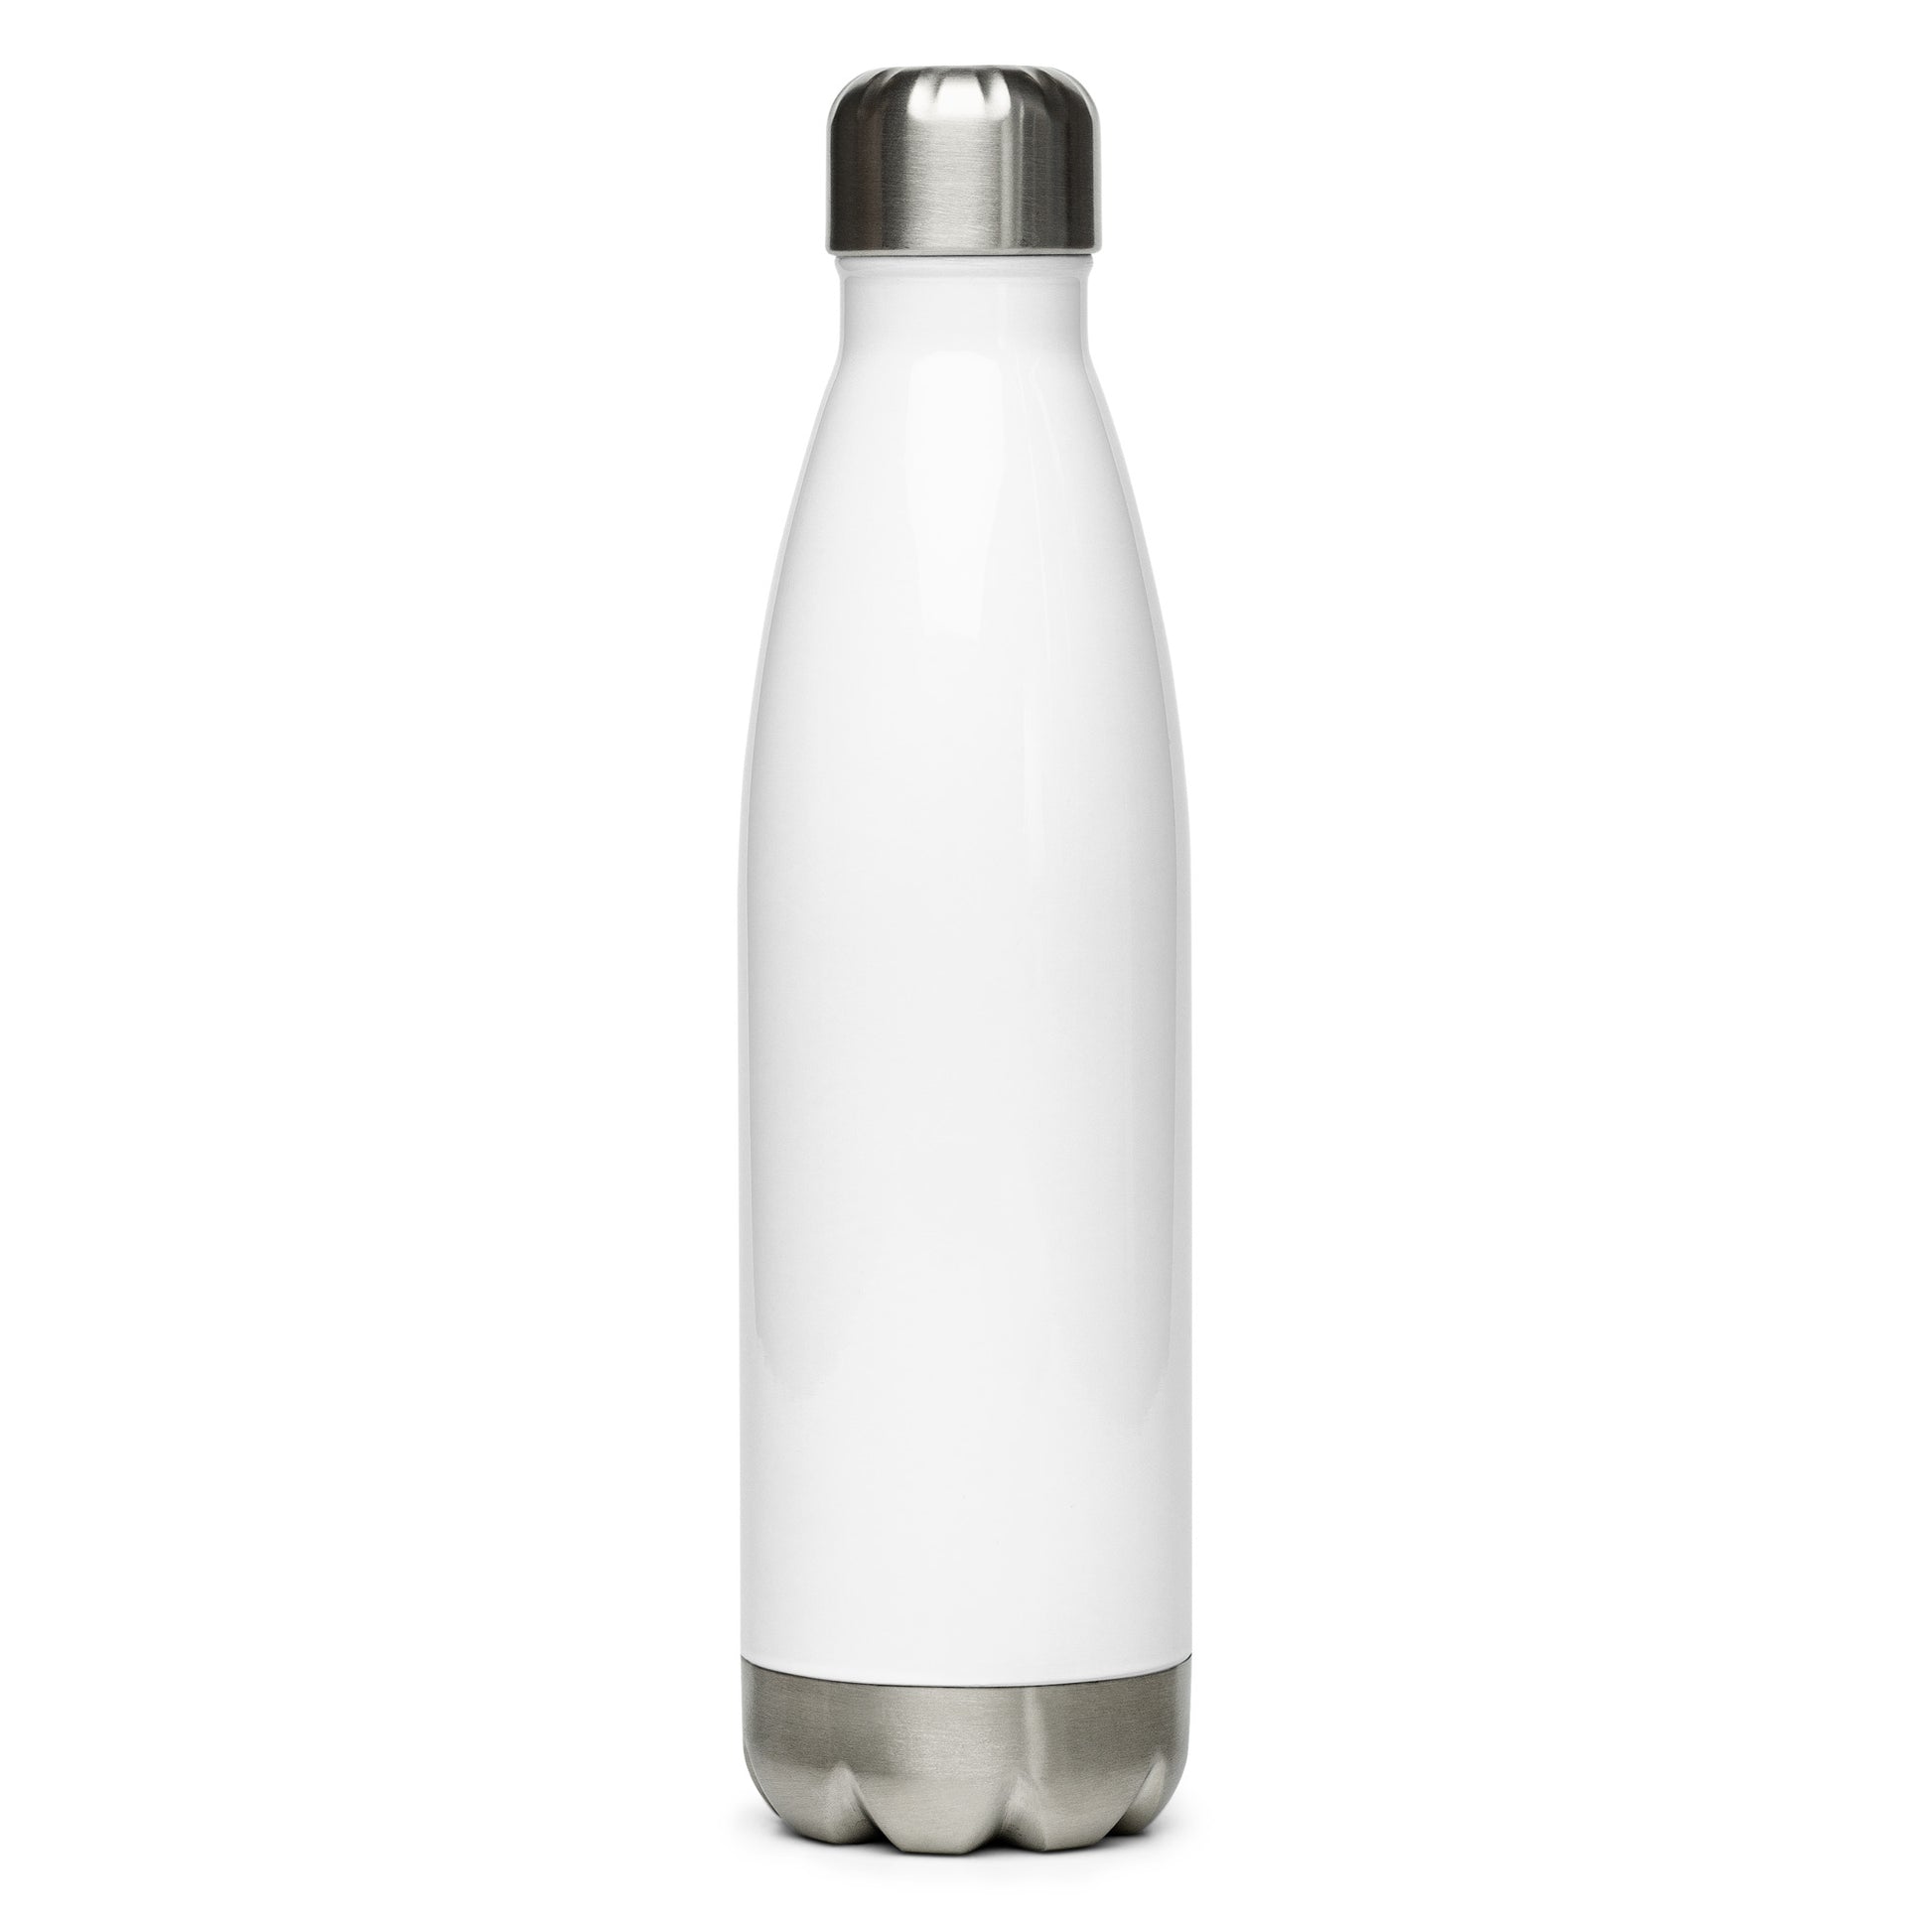 Aviation Gift Water Bottle - Camo Green • YQM Moncton • YHM Designs - Image 09